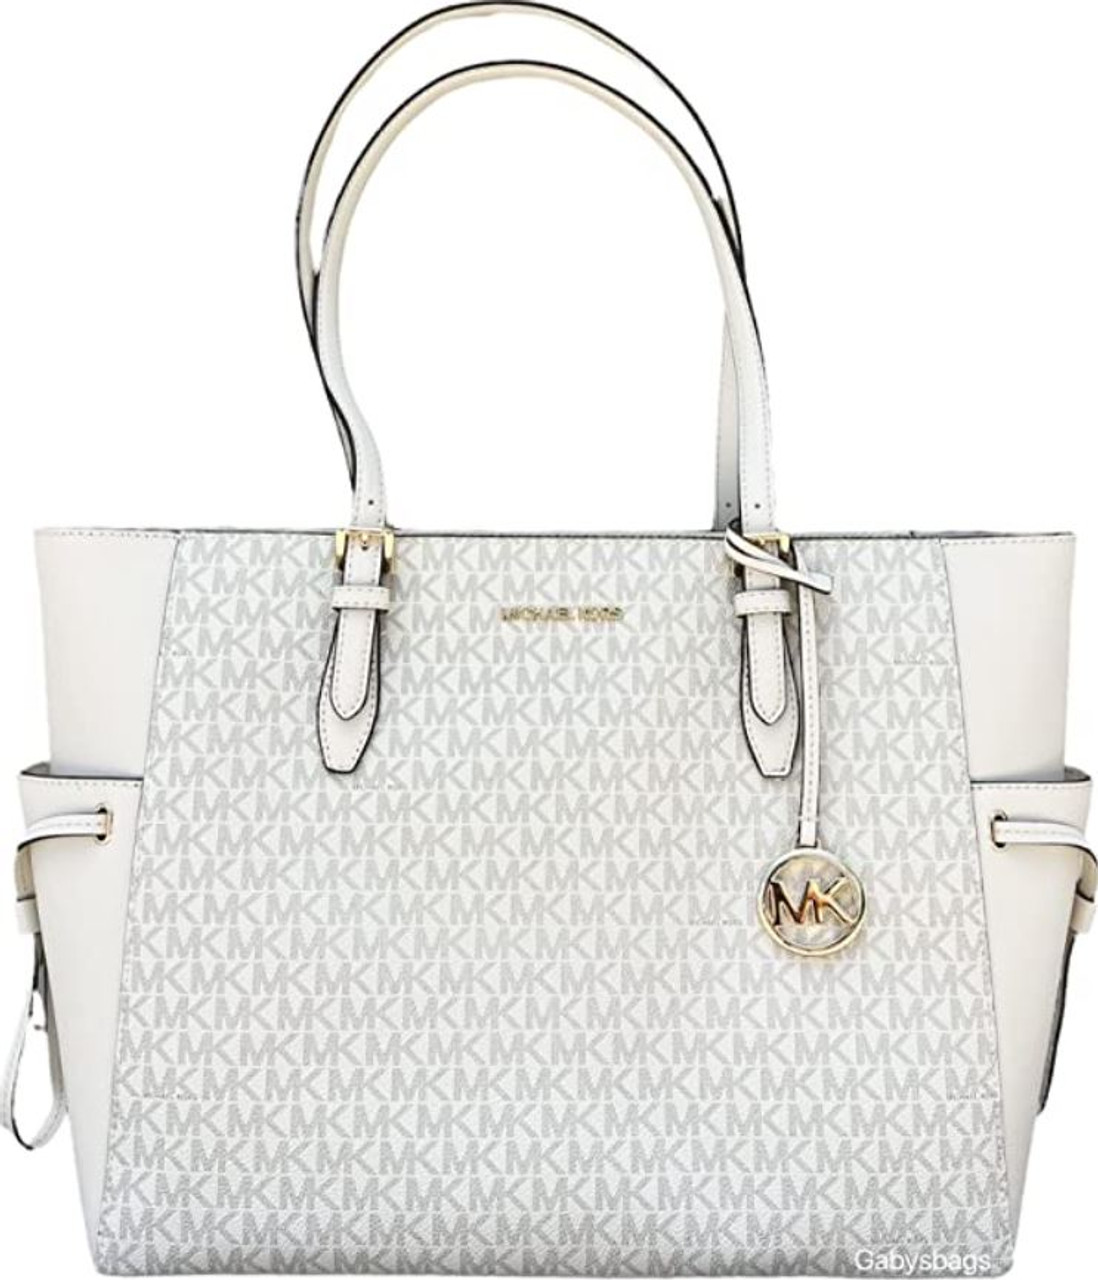 Michael Kors, Bags, This Is A Michael Kors Tote Bag From 220 Still  Wrapped Up